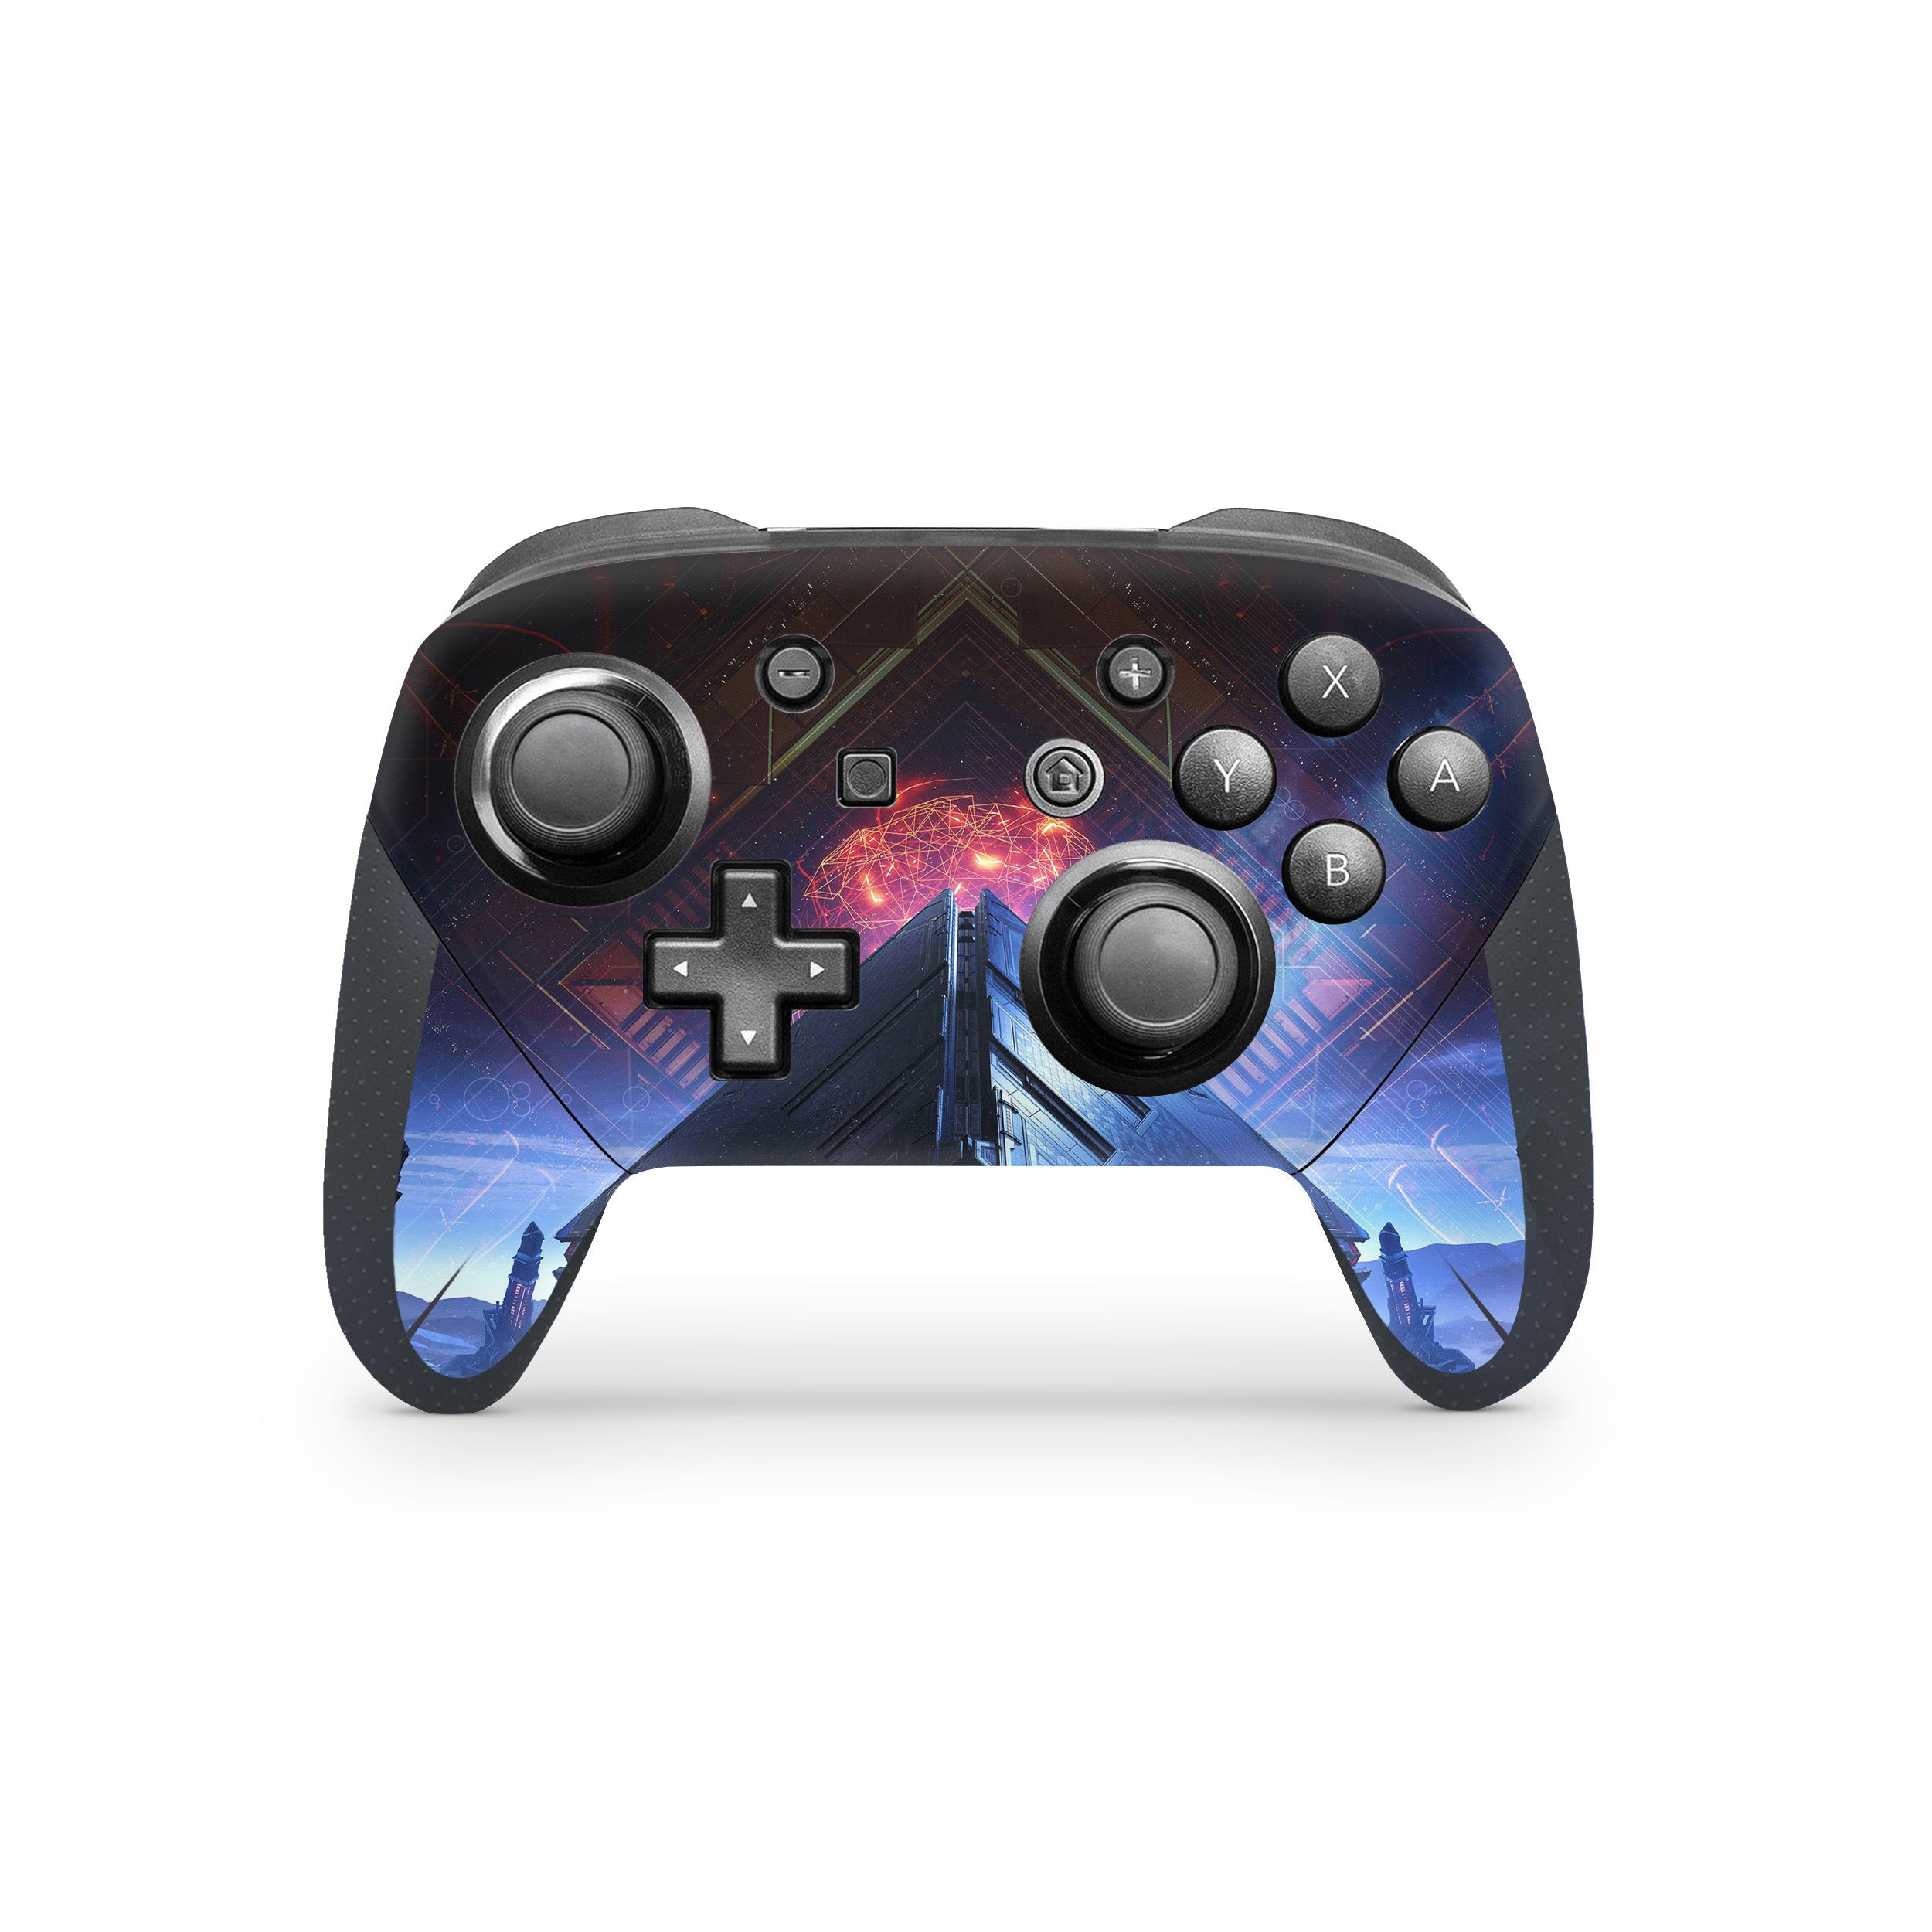 A video game skin featuring a Destiny 2 design for the Switch Pro Controller.